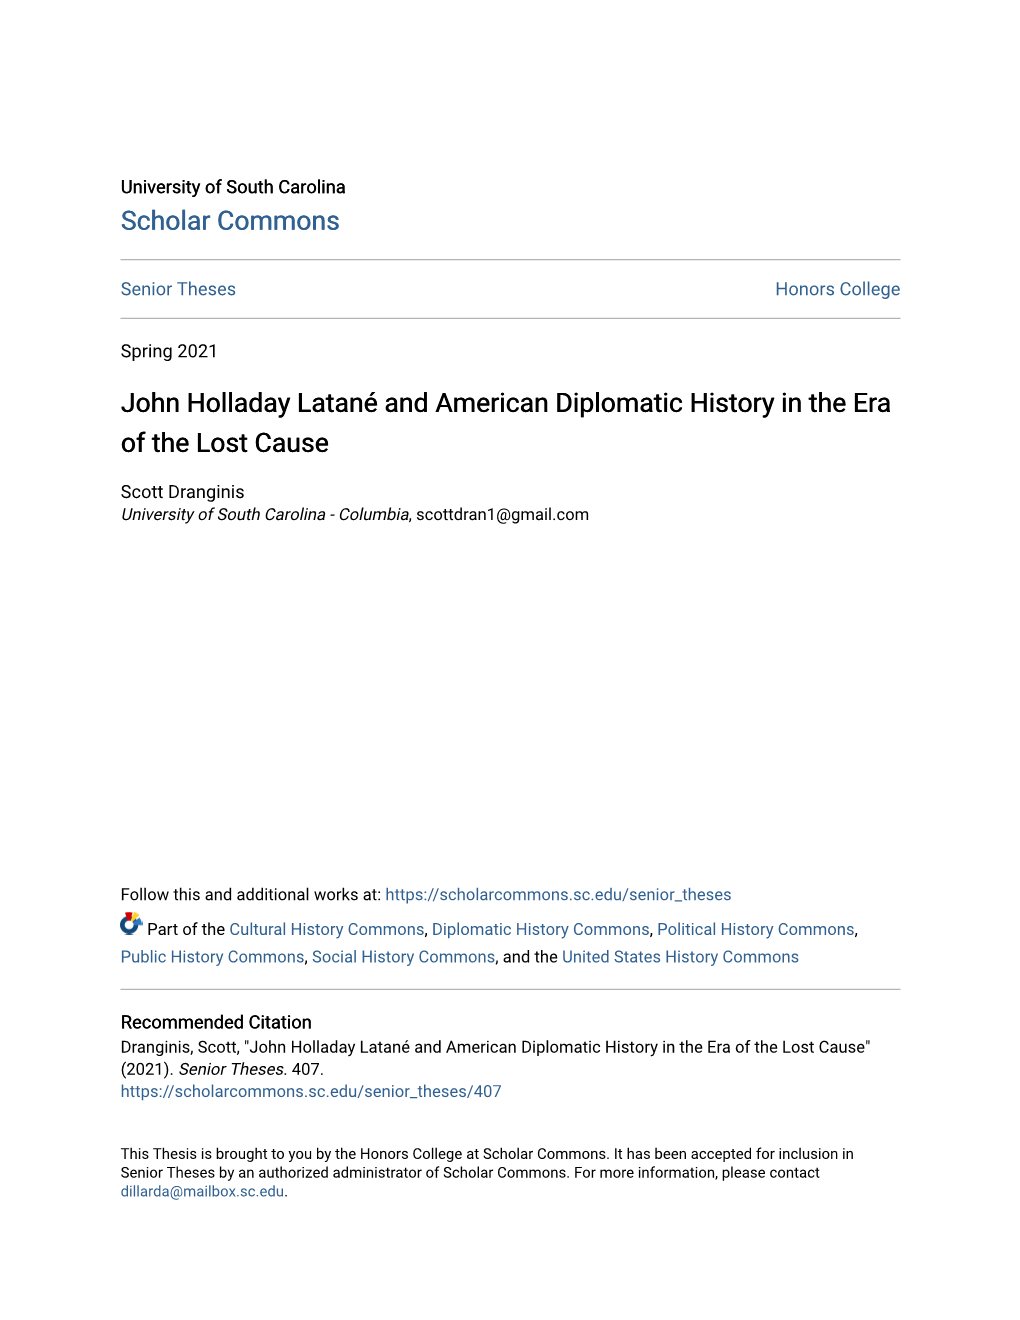 John Holladay Latané and American Diplomatic History in the Era of the Lost Cause